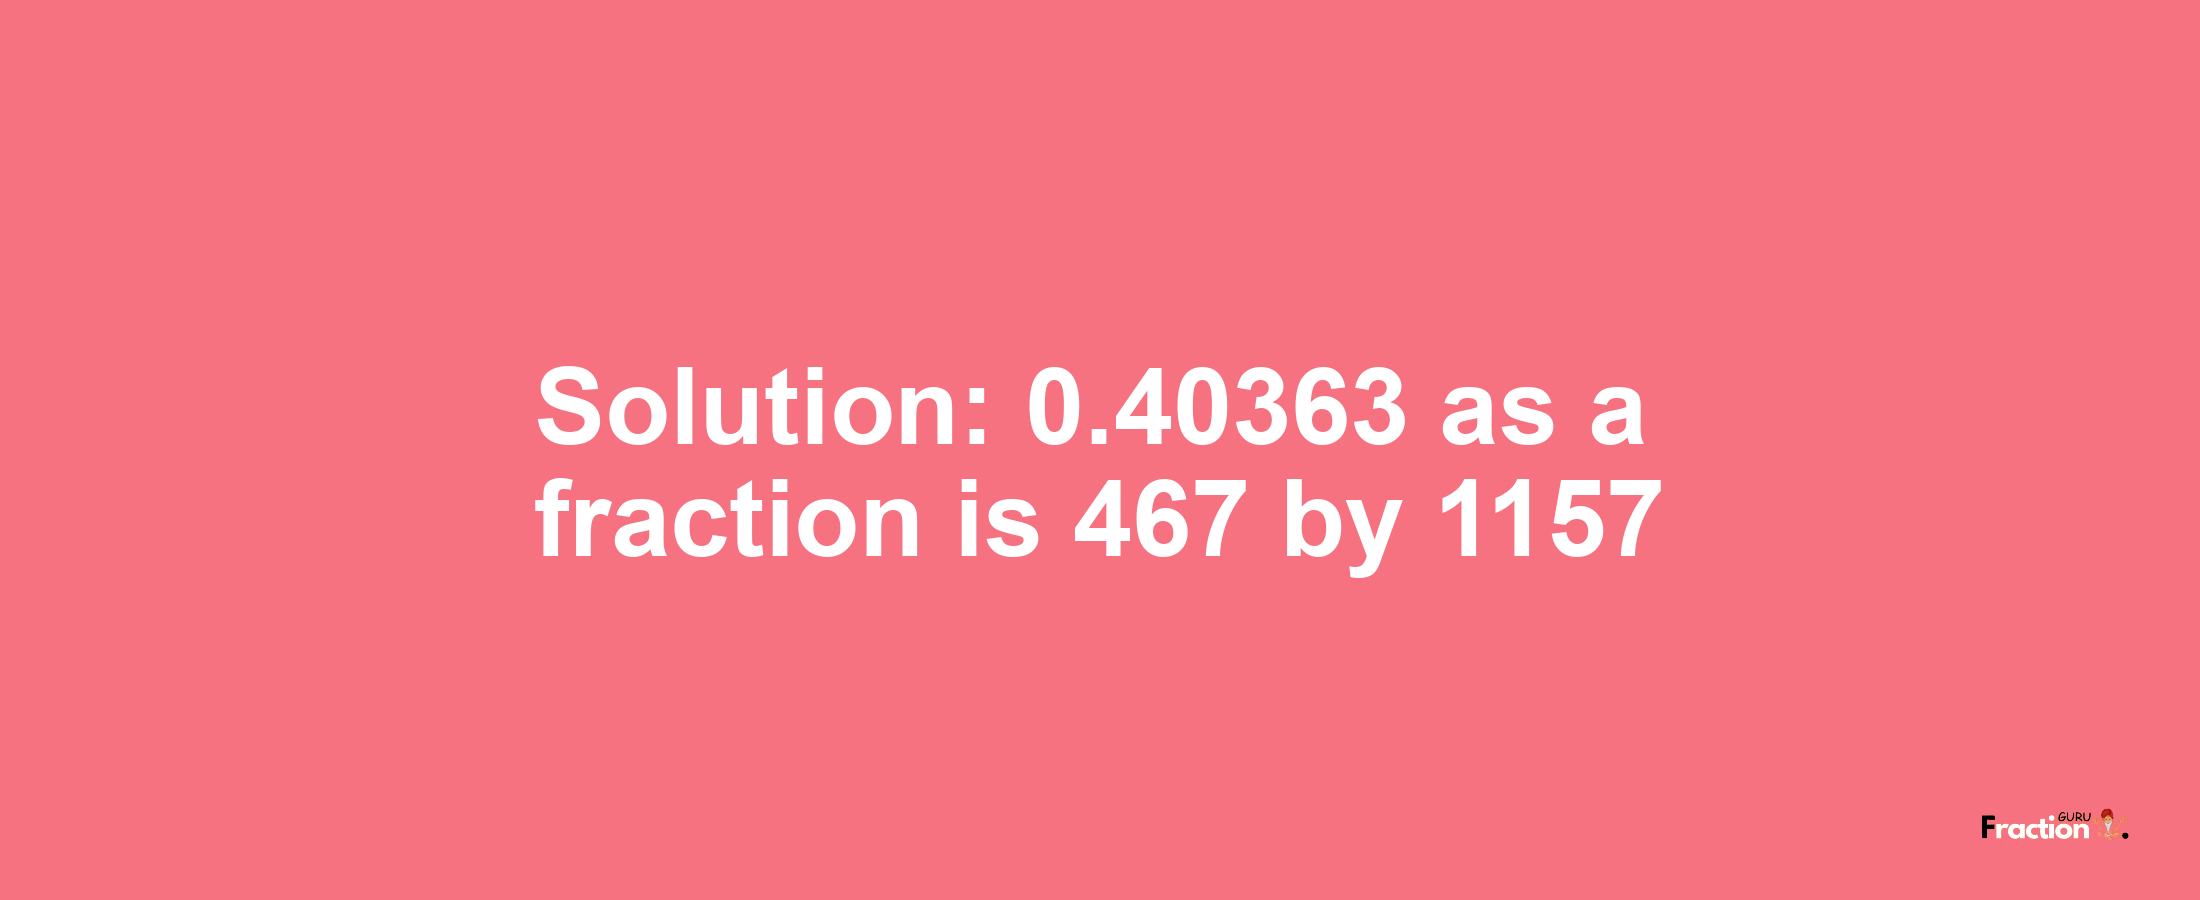 Solution:0.40363 as a fraction is 467/1157